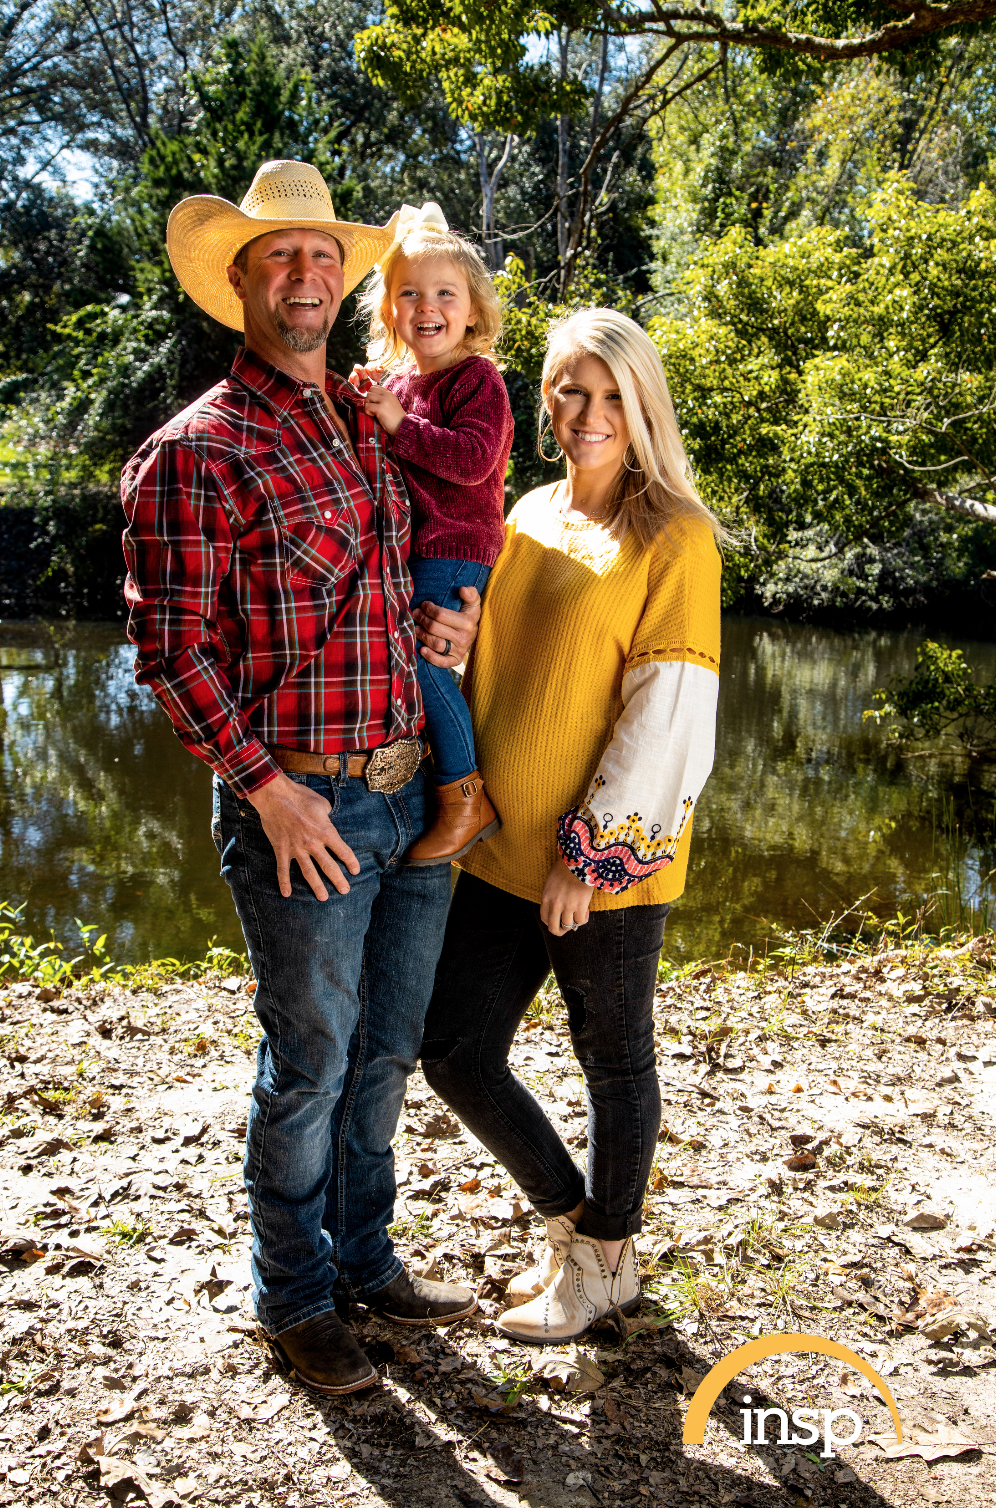 "The Cowboy Way" star Bubba Thompson and his wife Kaley pose with their kids. | Source: INSP